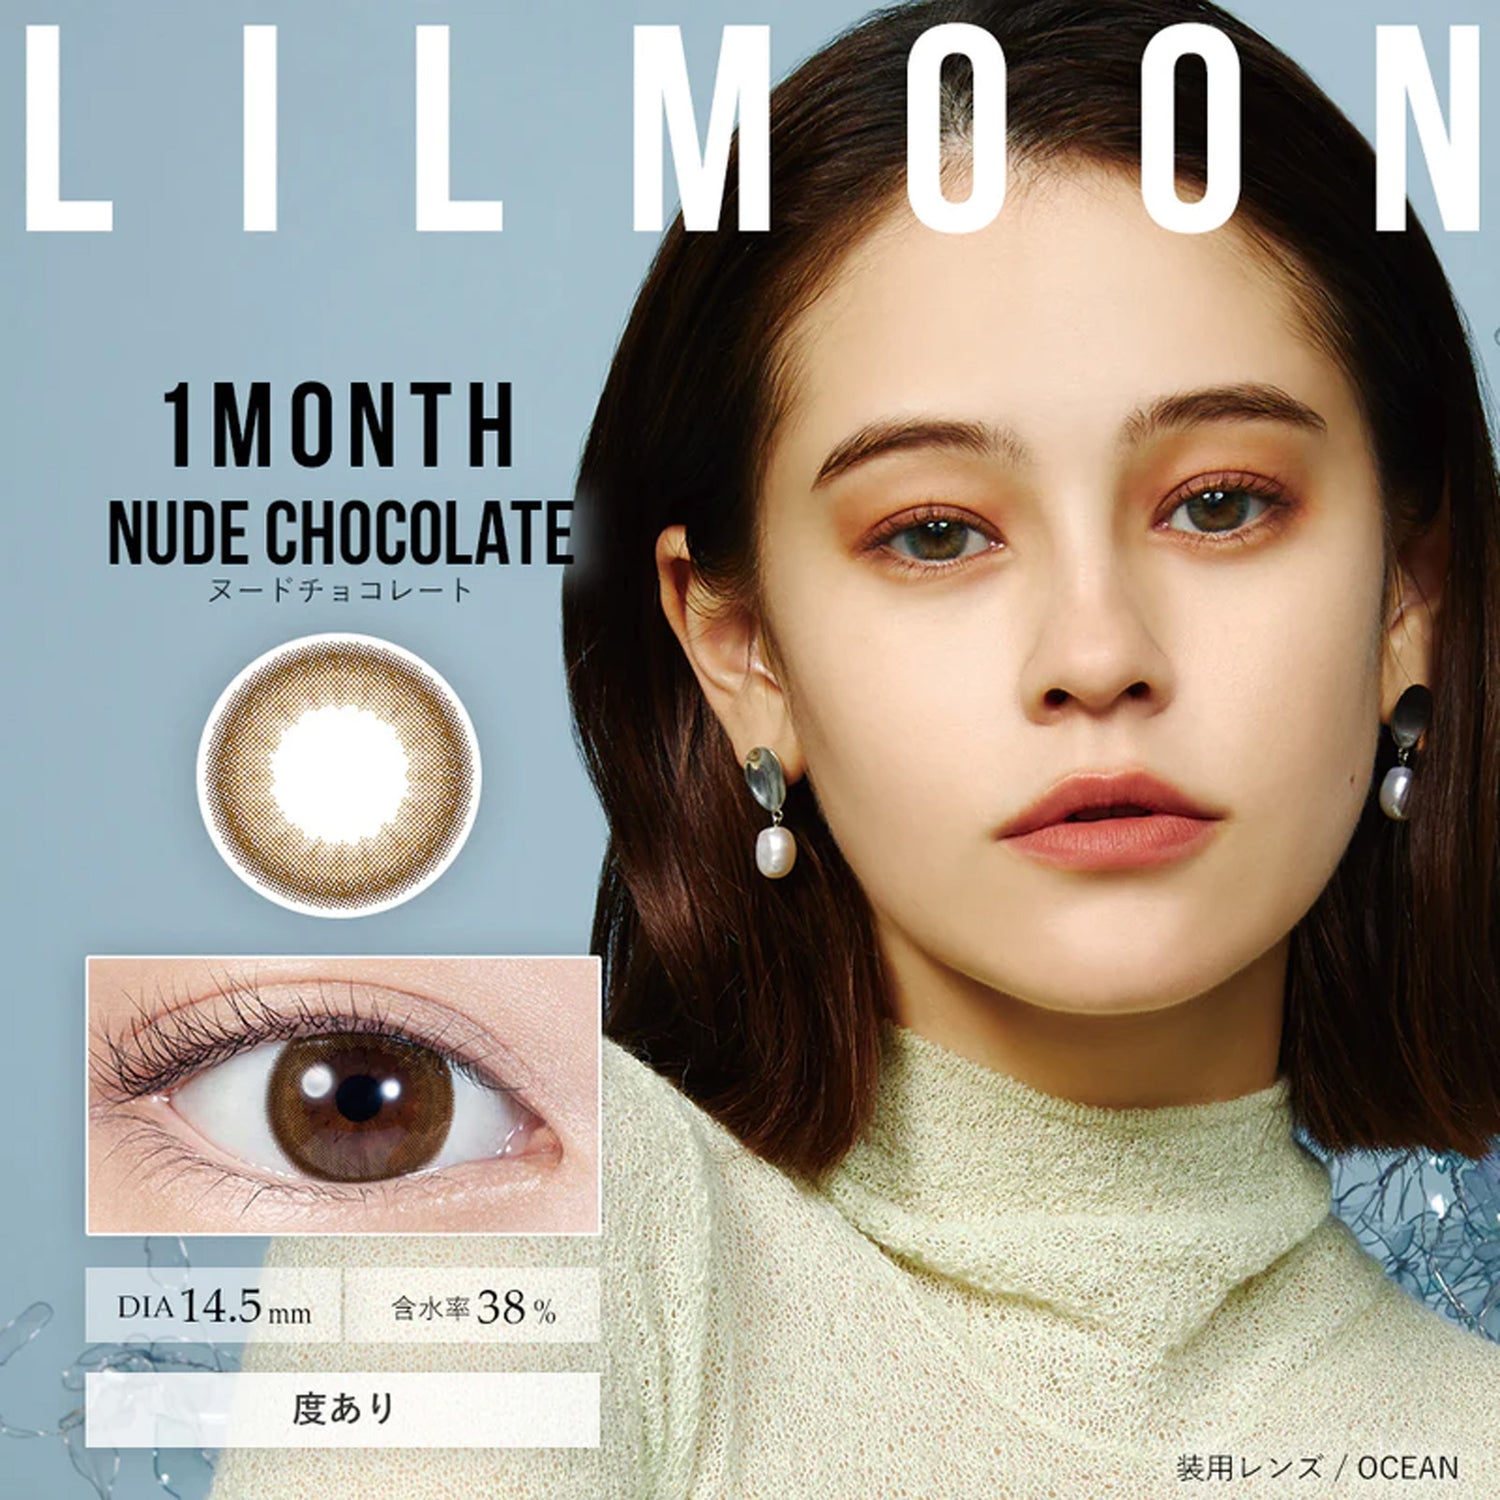 LILMOON Monthly Contact Lenses-Nude Chocolate